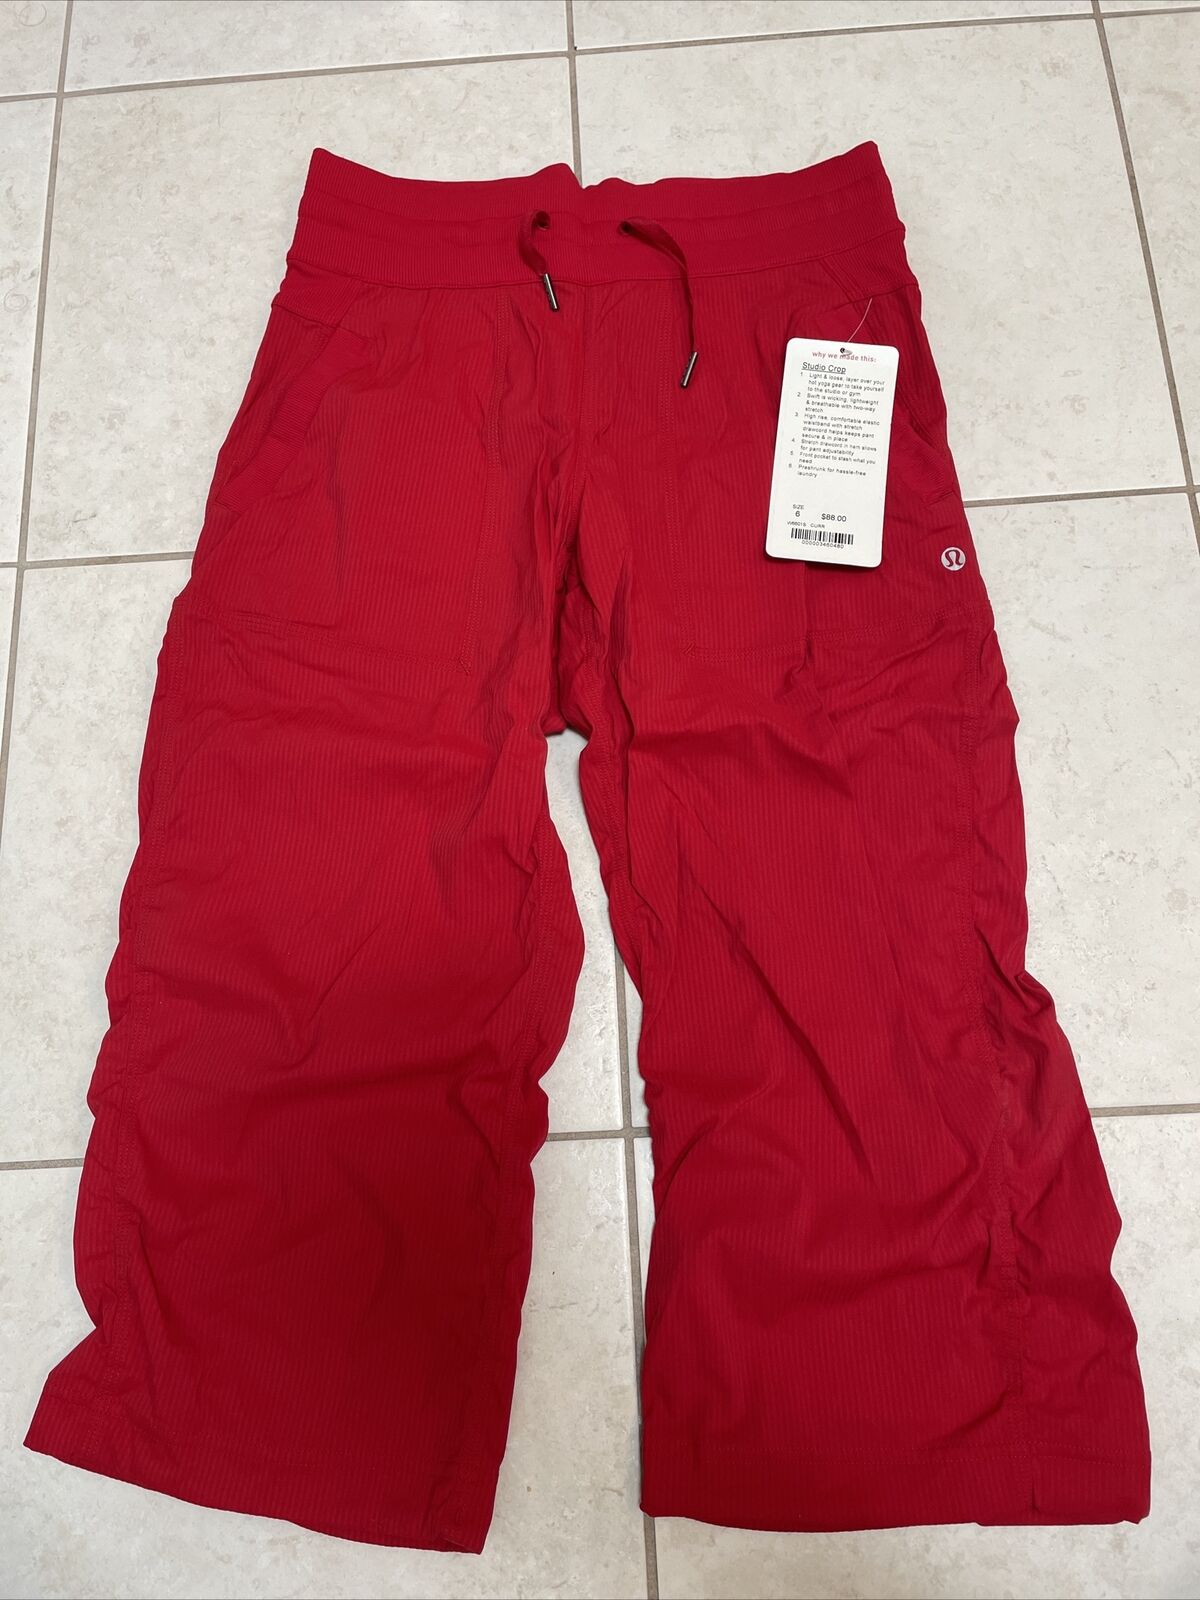 Lululemon Studio Crops, Current Red, Size 6, Nwt!